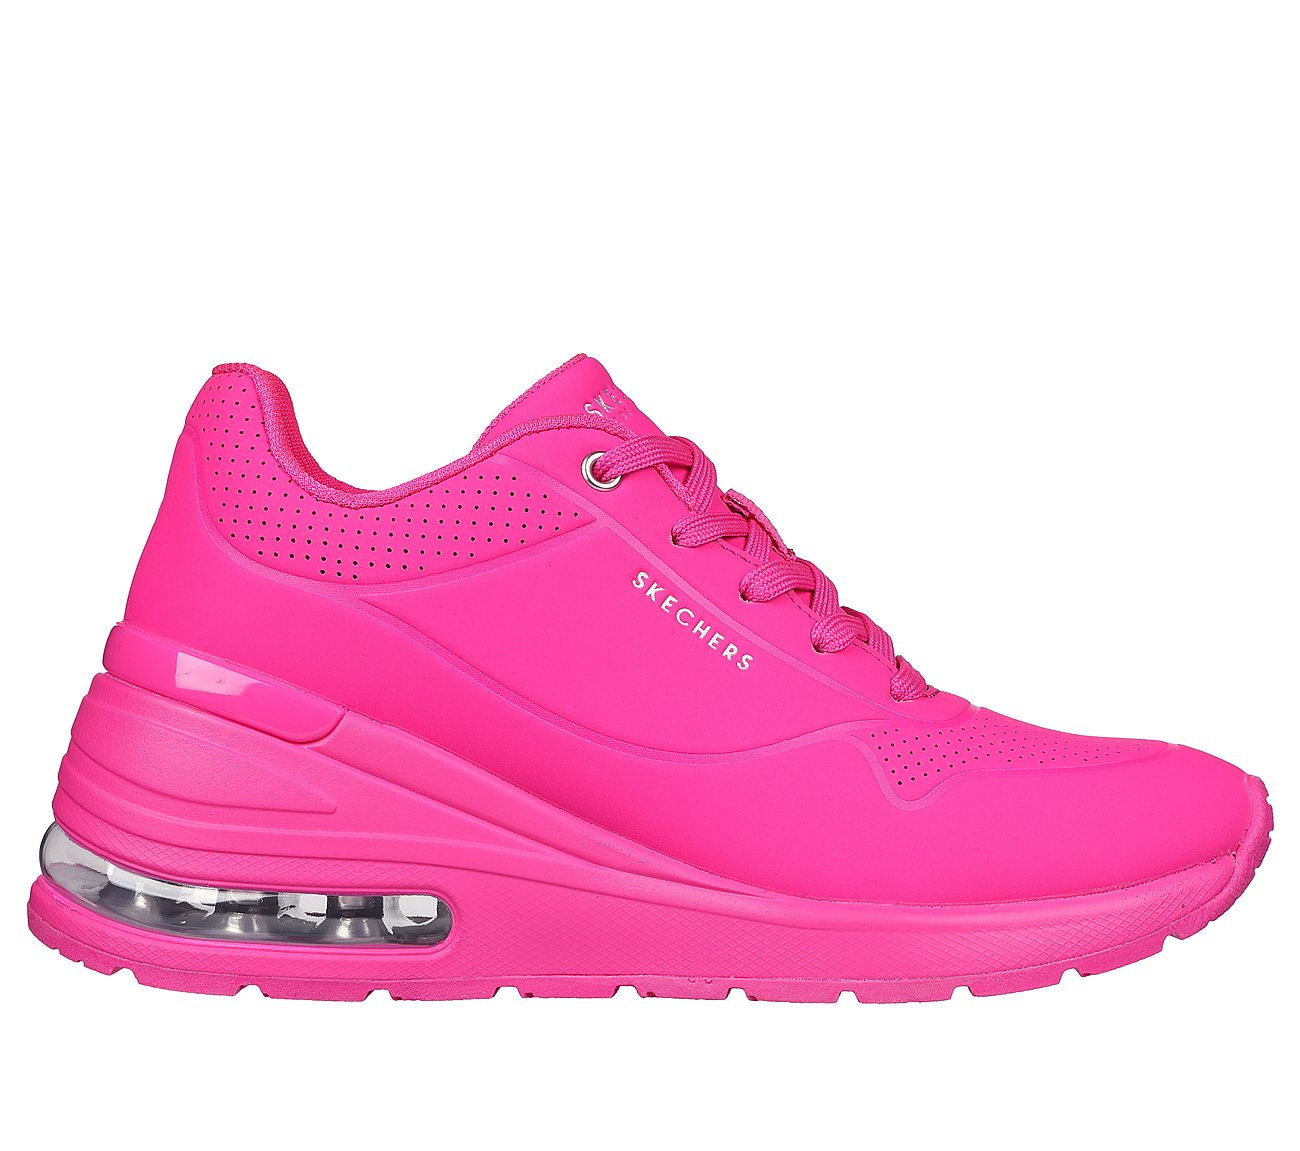 MILLION AIR - ELEVAT-AIR, HHOT PINK Footwear Lateral View